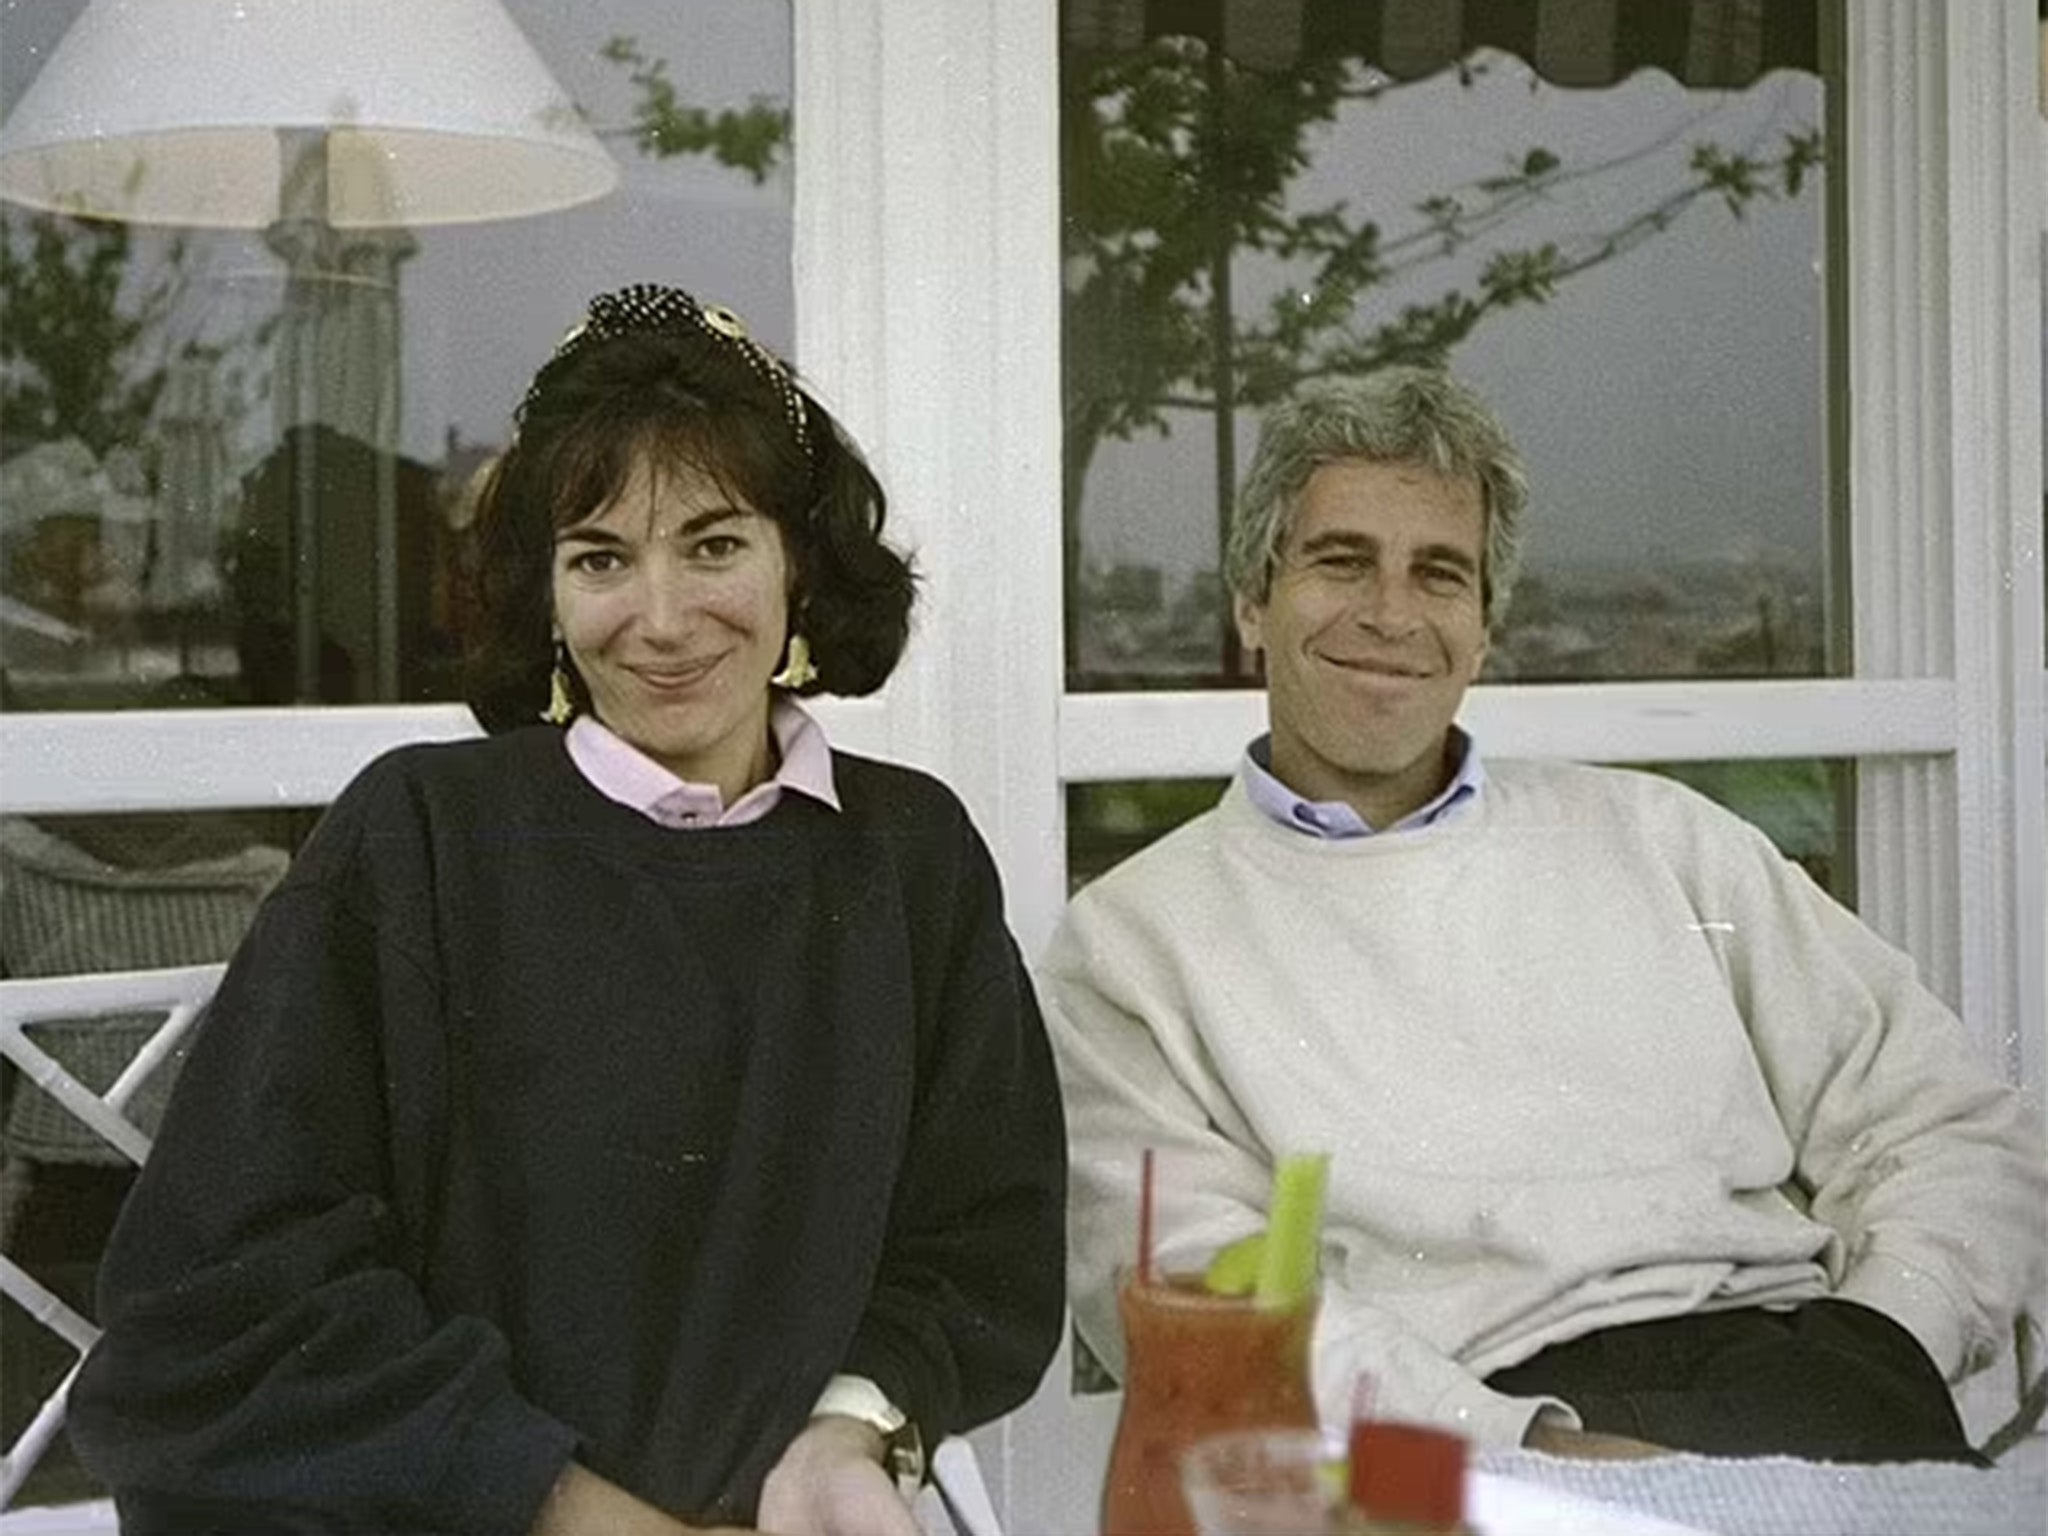 Virginia Giuffre said she never would have met Epstein (r) if it wasn’t for Ghislaine Maxwell (l)